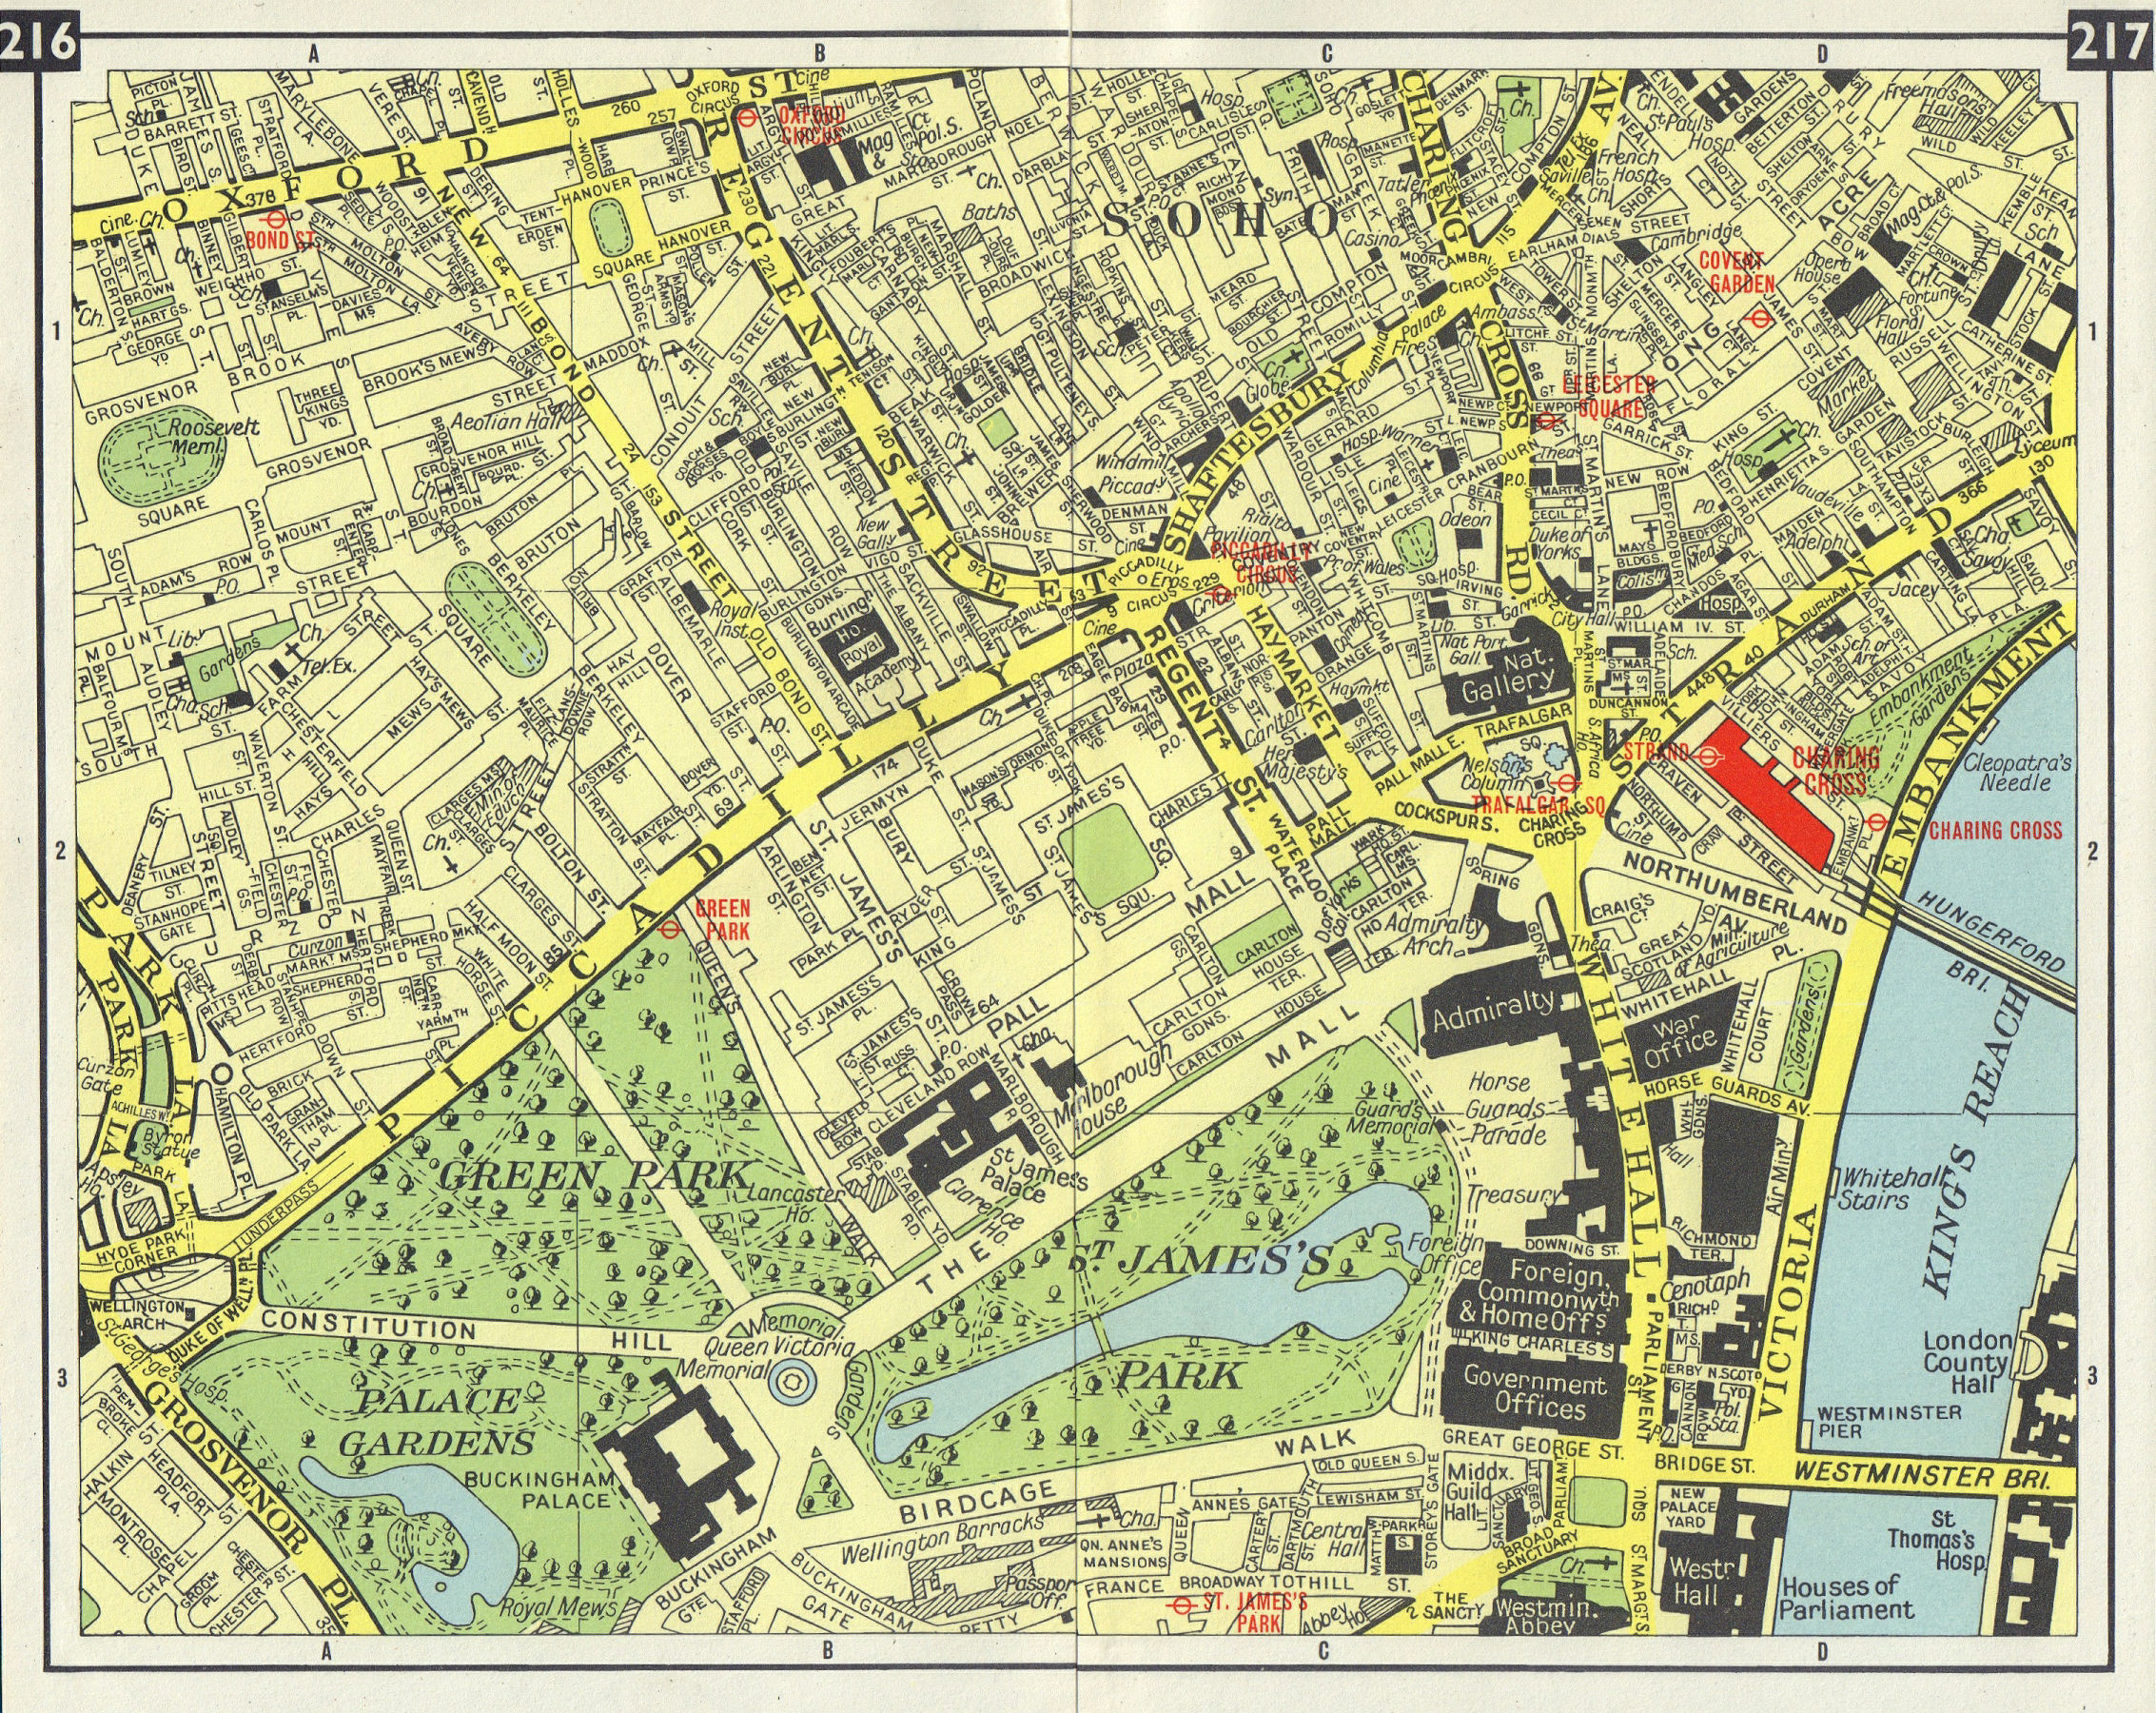 LONDON WEST END Mayfair Soho St James's Westminster Covent Garden 1965 old map